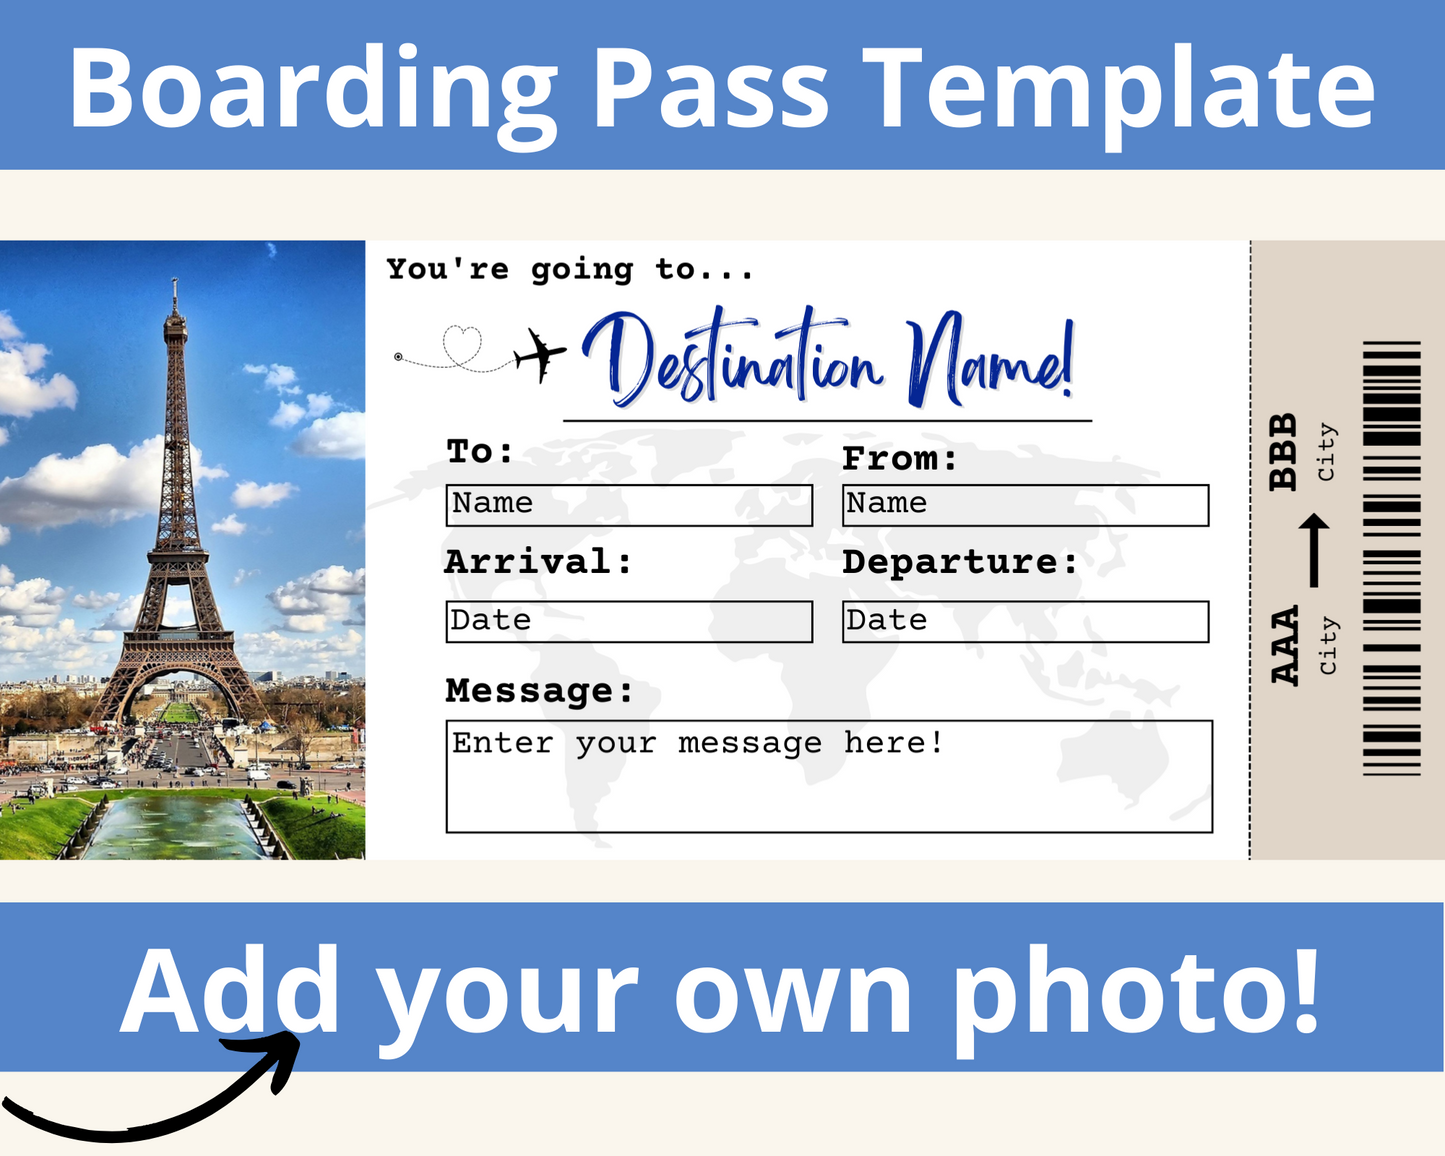 Boarding Pass Template: Add your own image!